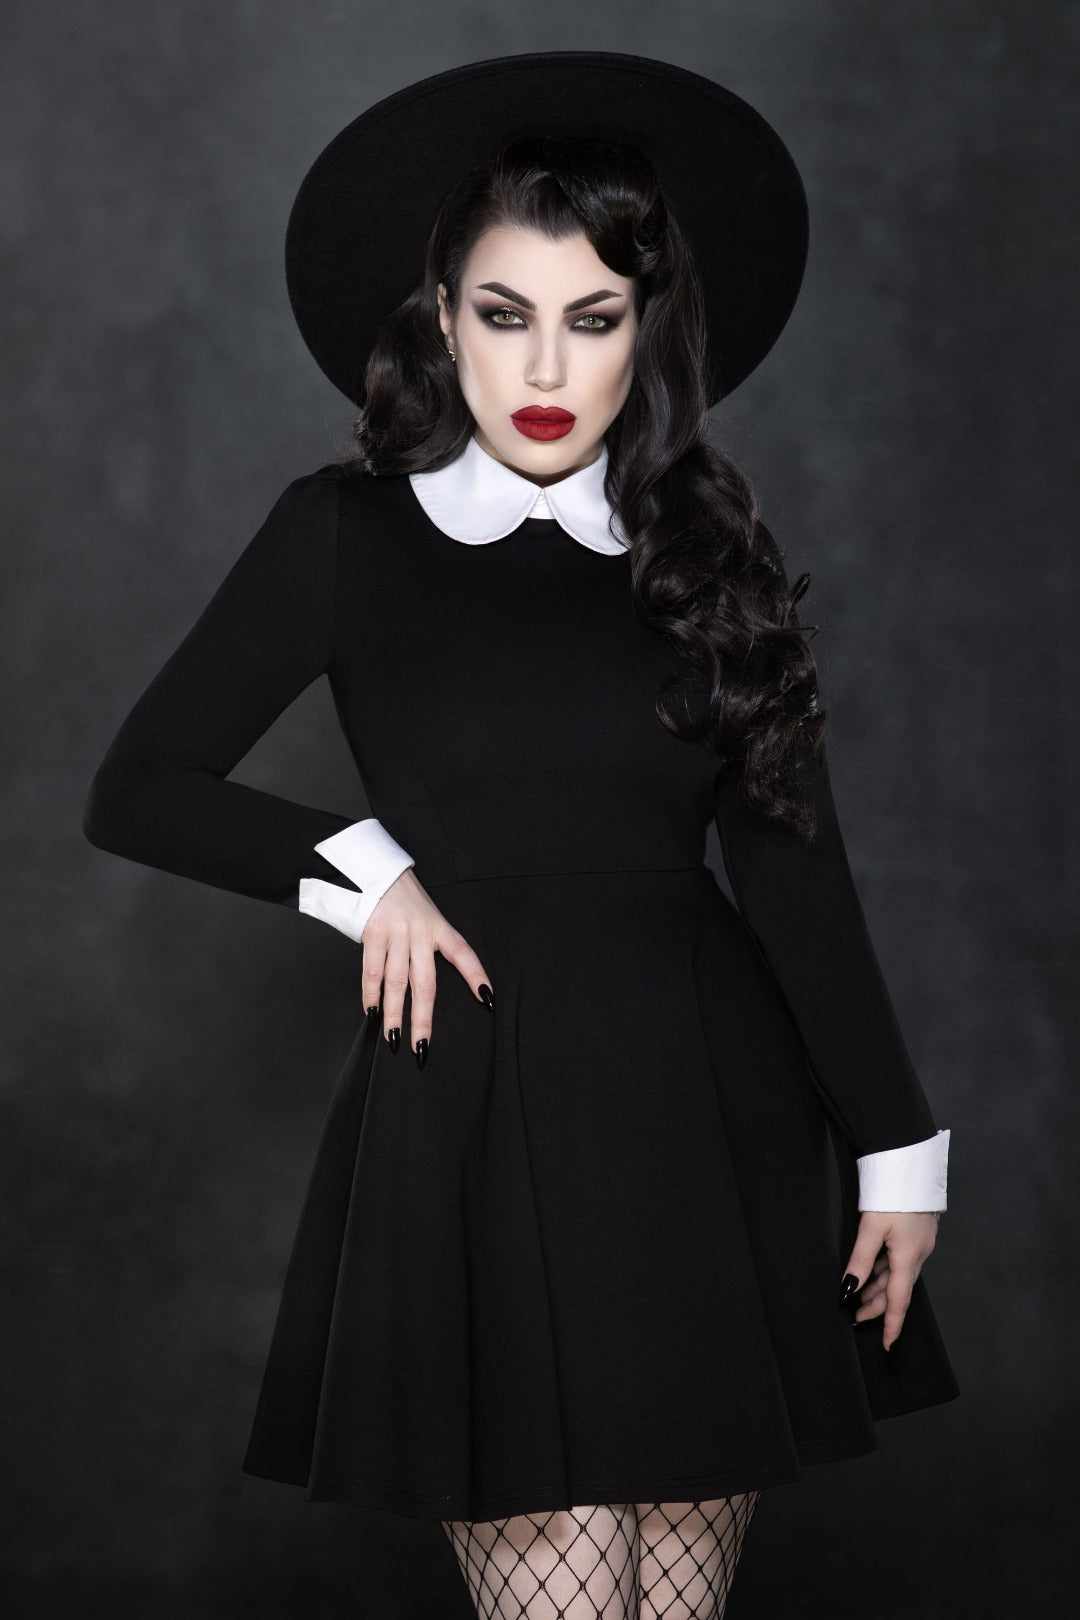 Model posing against grey background wearing Addams Dress, black hat and fishnets. 